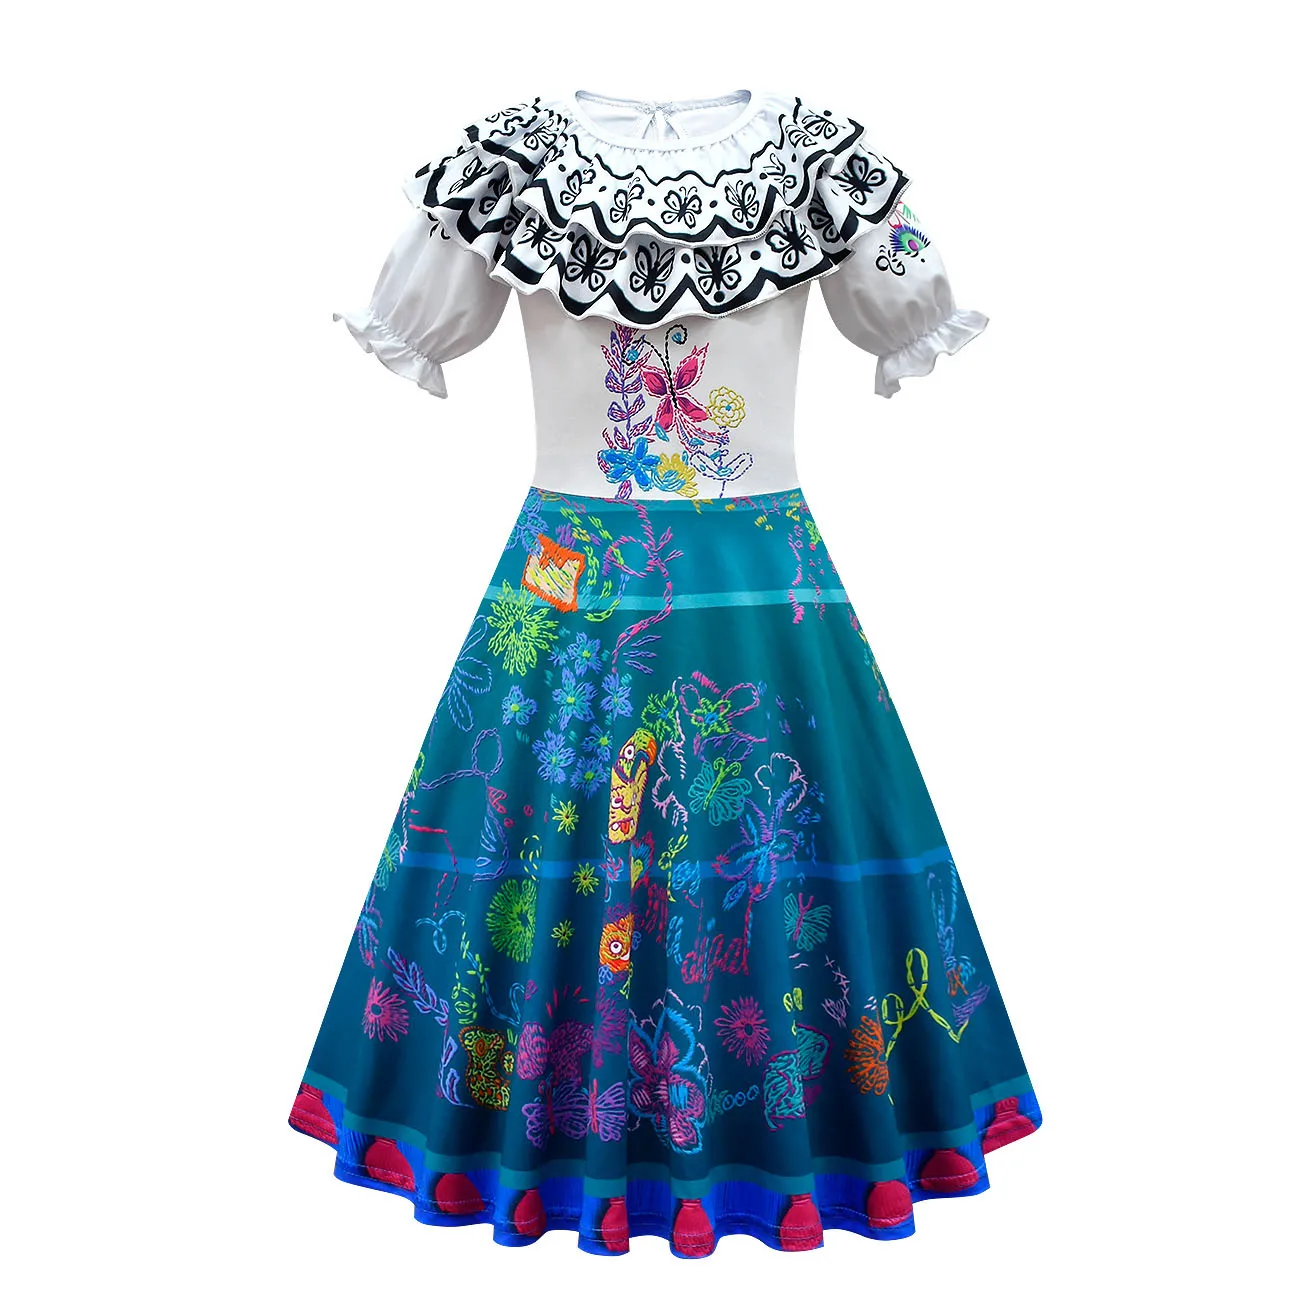 Girls Costume Encanto Princess Dress Mirabel Kids Cosplay Dresses Short Sleeve Cartoon Clothing Children Party Birthday Outfits clothing sets baby